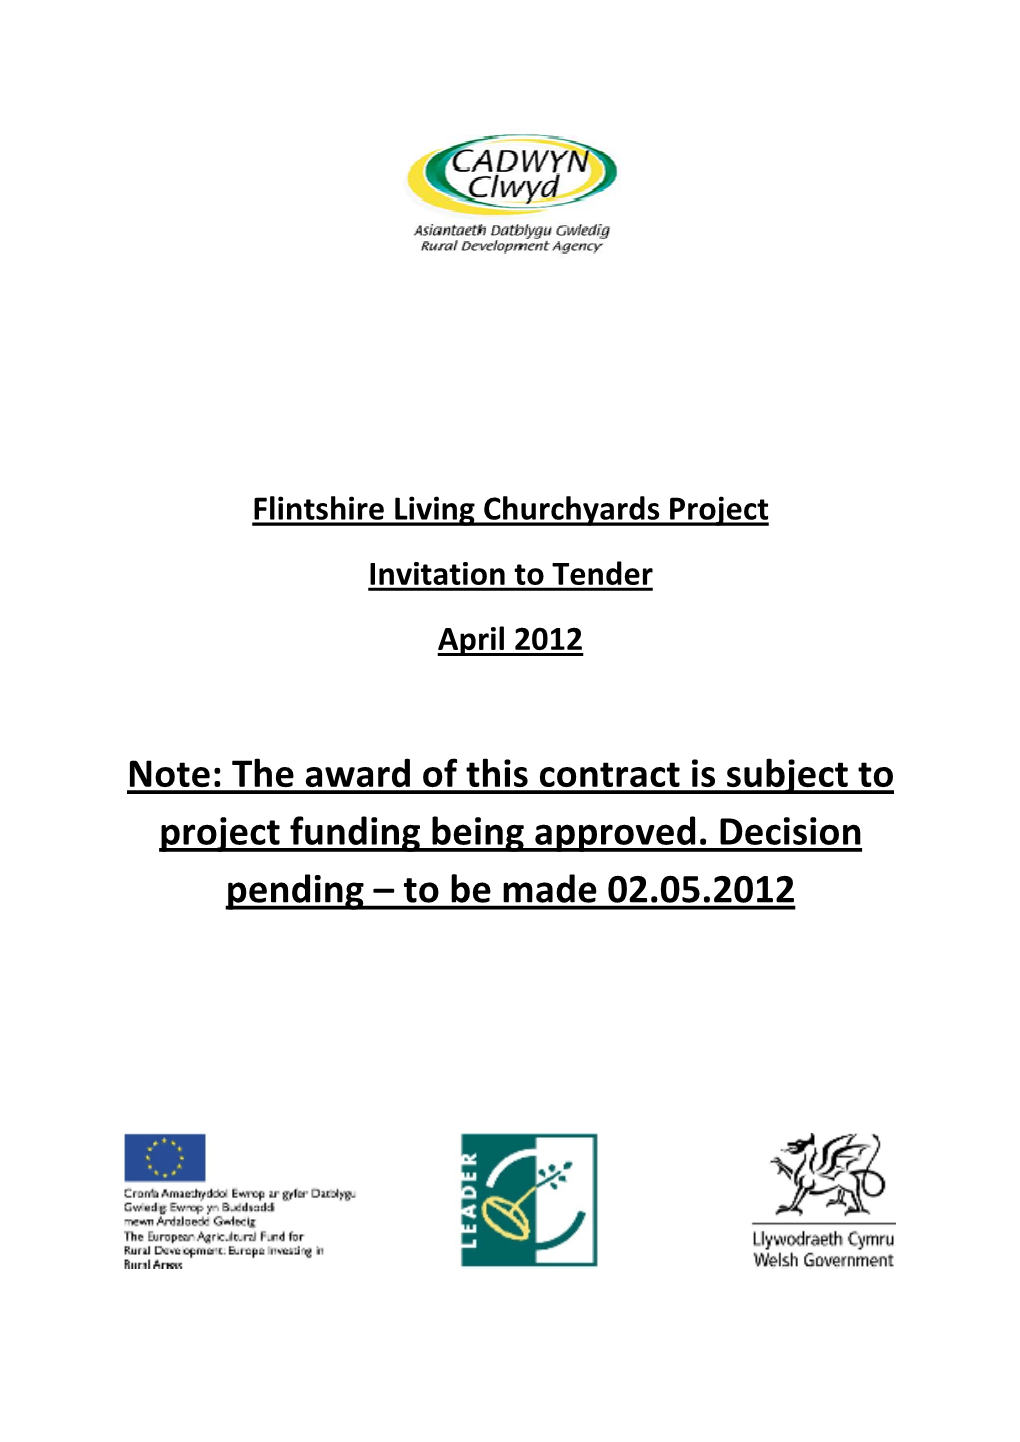 Note: the Award of This Contract Is Subject to Project Funding Being Approved